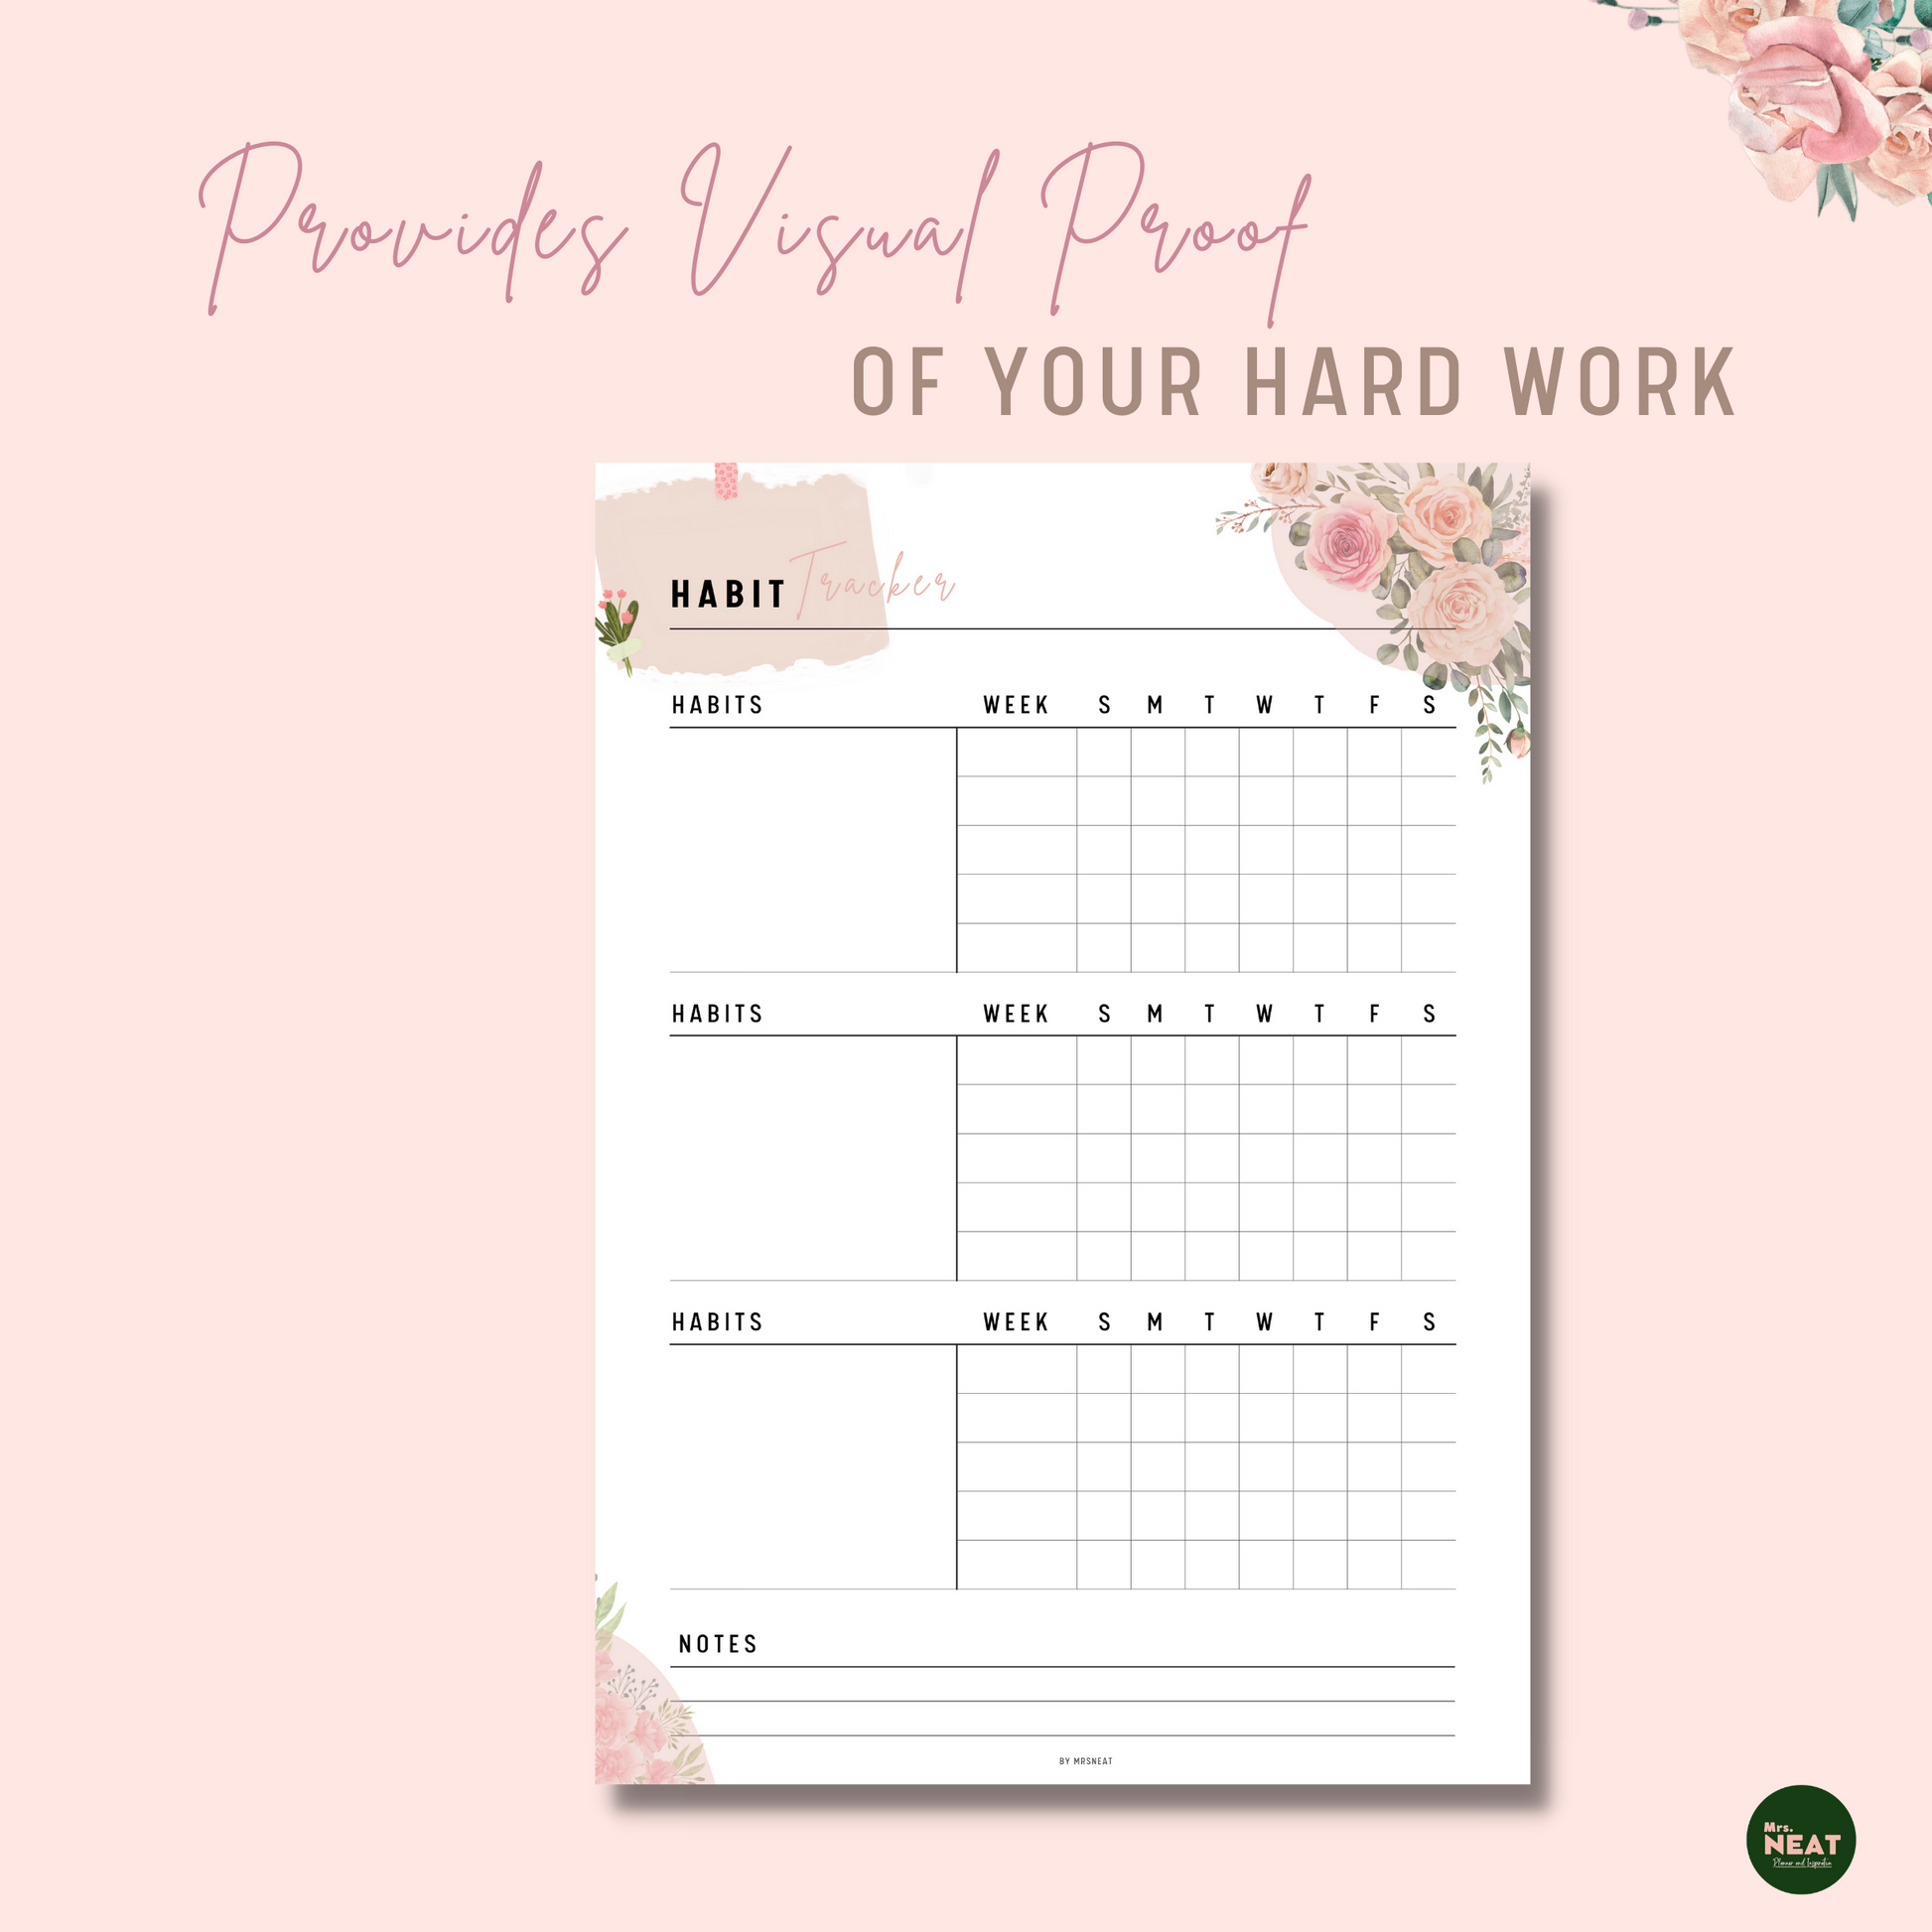 Clean and Cute Floral Daily Habit Tracker with room for Habits and notes, capture 5 weeks as visual proof of the hard work